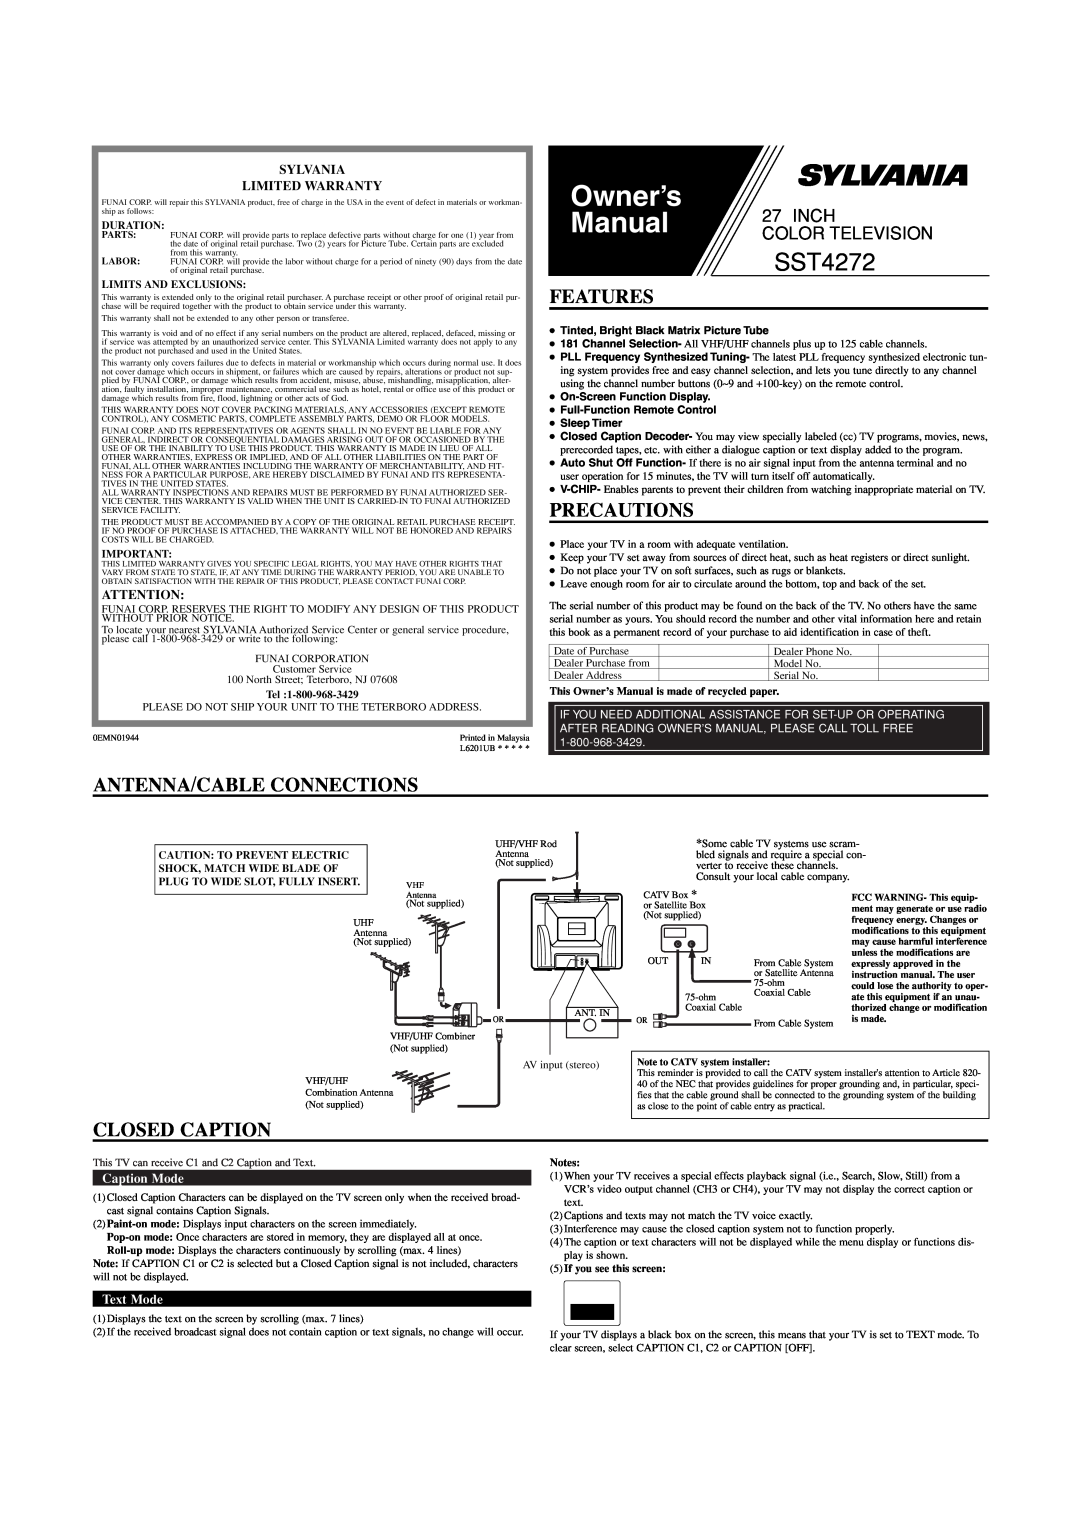 Sylvania SST4272 owner manual Features, Precautions, Antenna/Cable Connections, Closed Caption, Sylvania Limited Warranty 